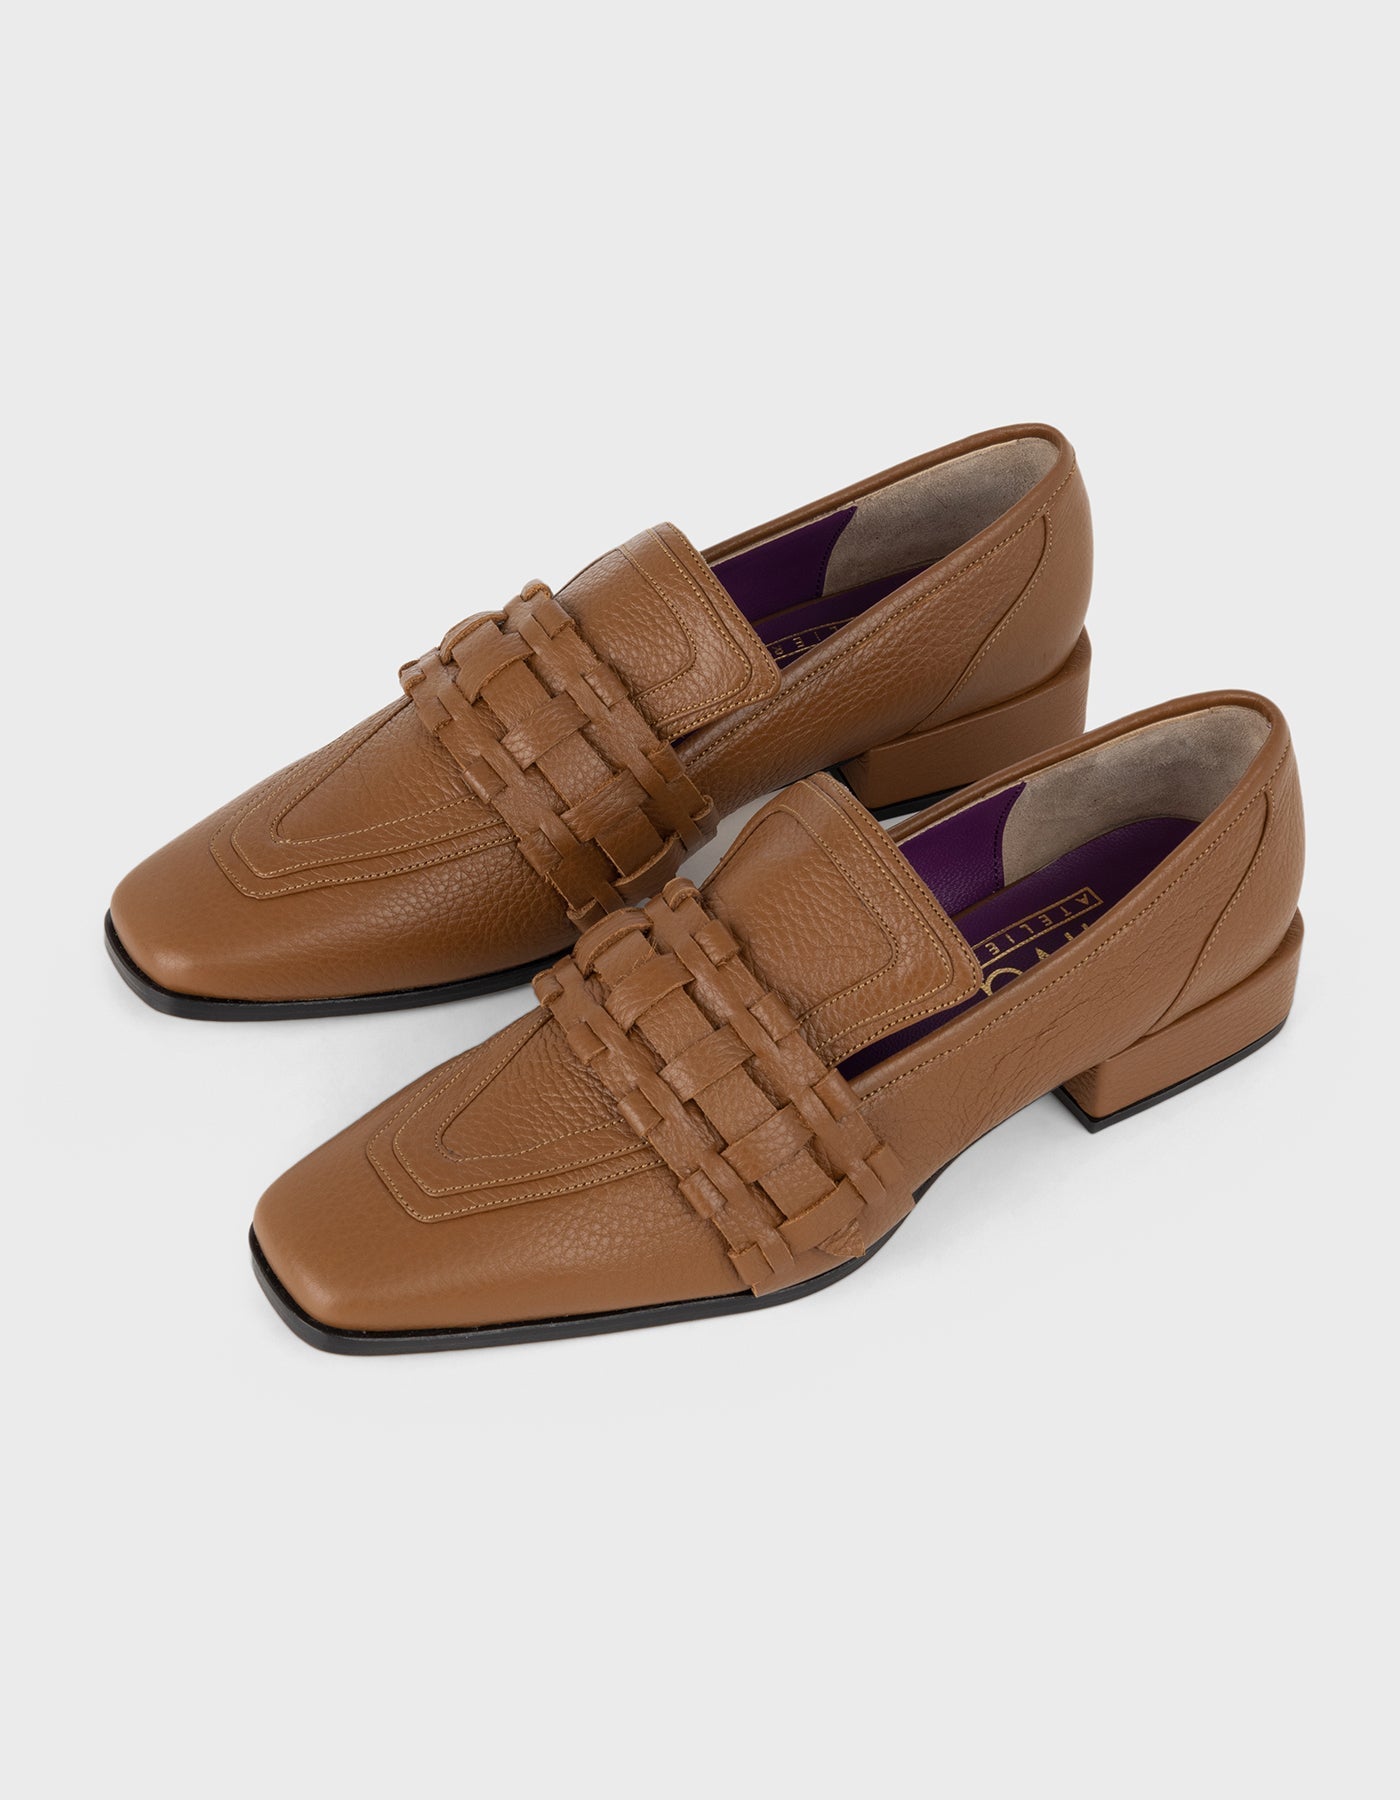 Lora Loafers - Finest Quality HiVa Atelier GmbH Leather Accessories